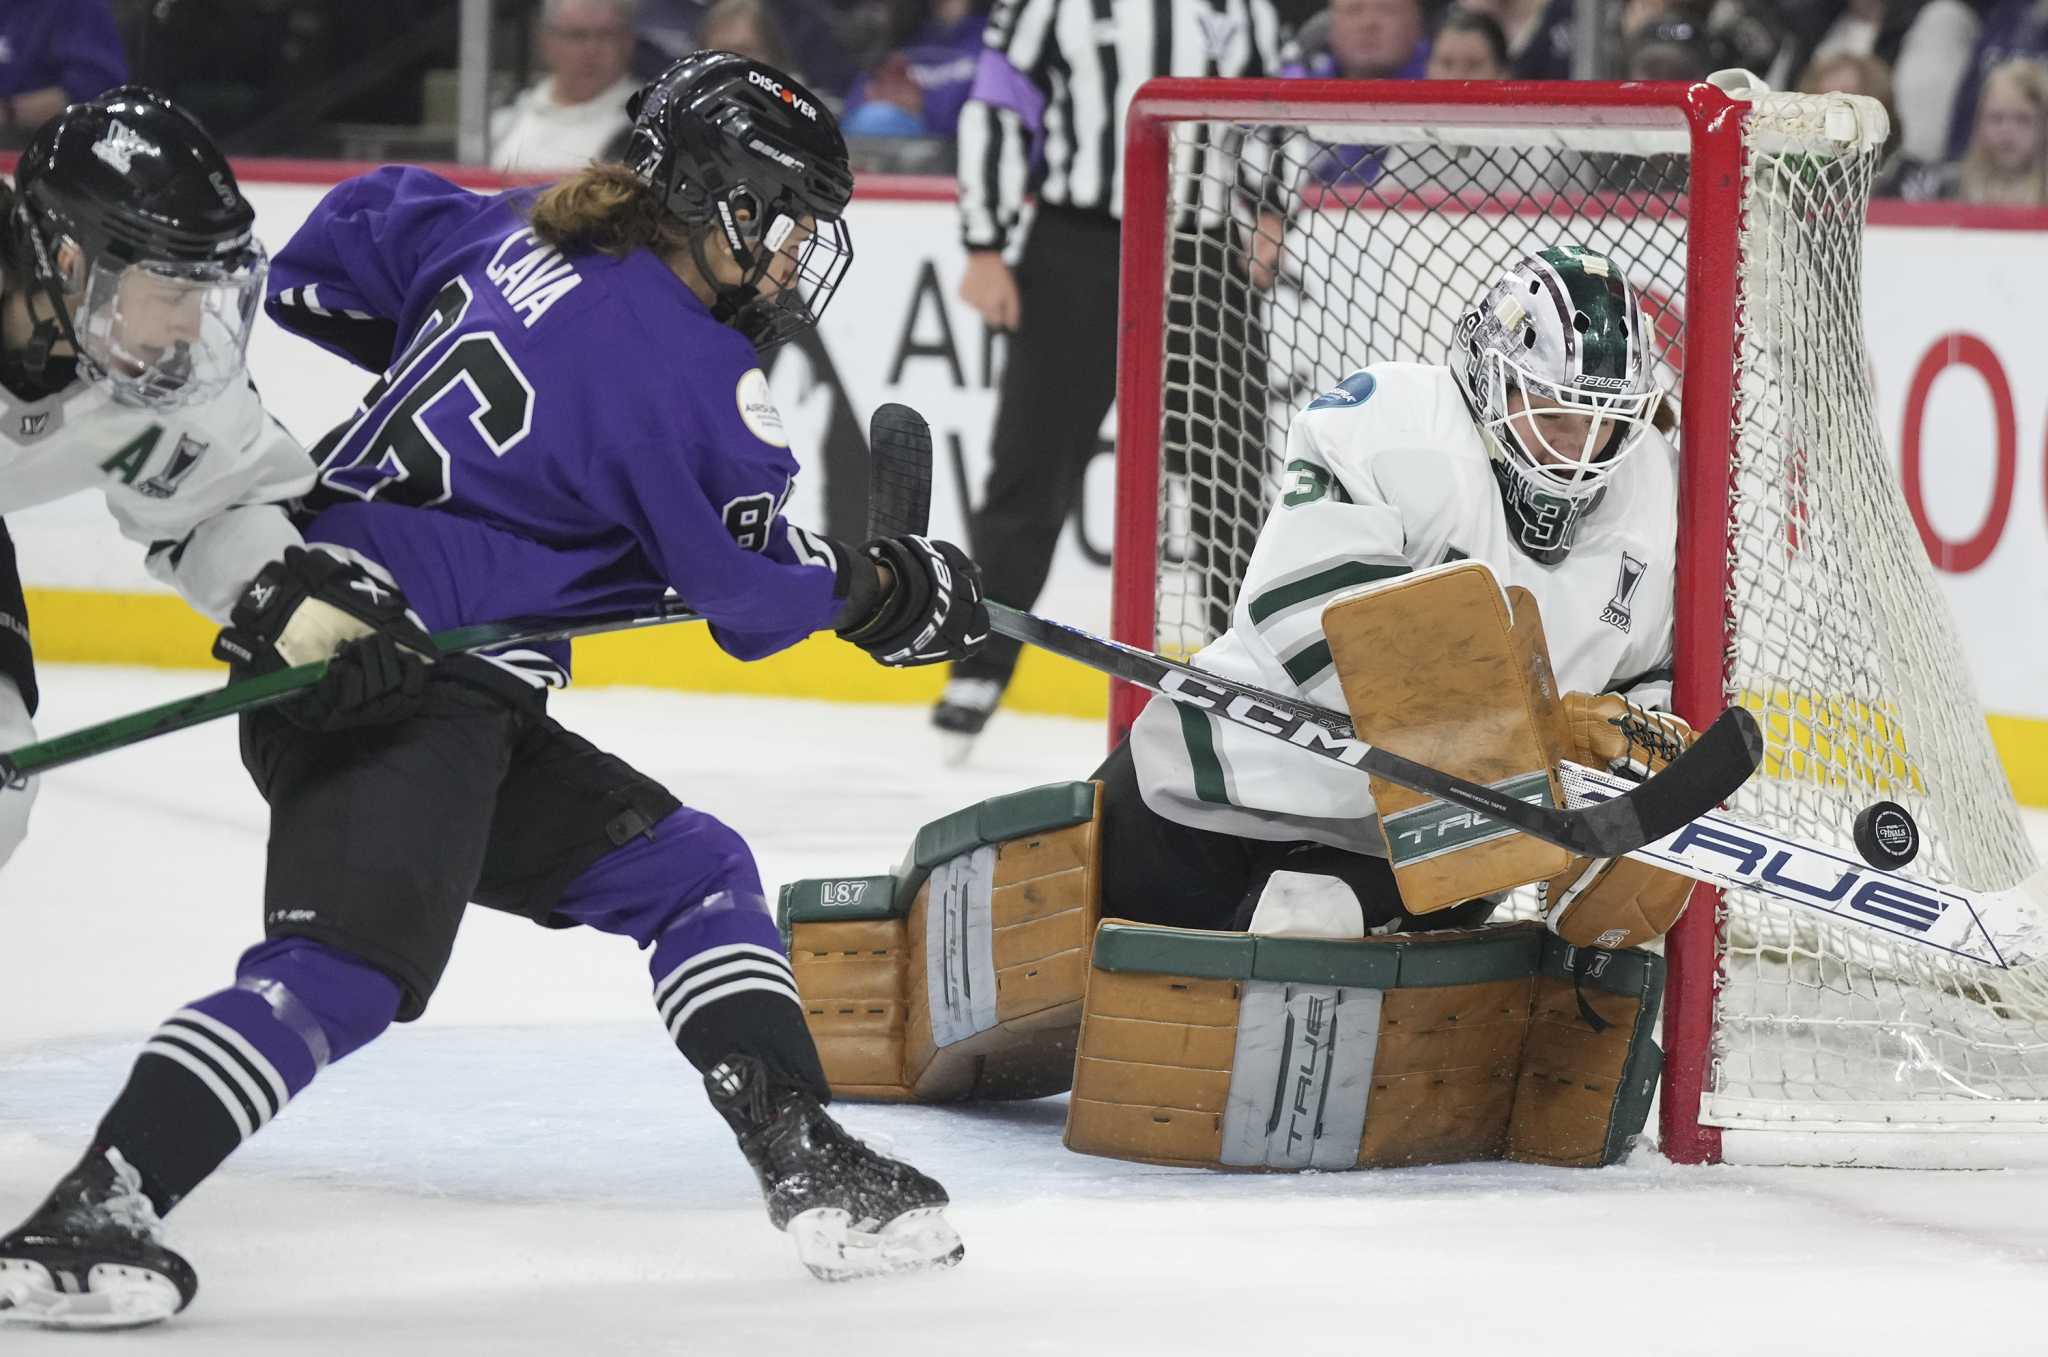 Muller scores late in 2nd OT, lifting Boston over Minnesota to send PWHL finals to decisive Game 5